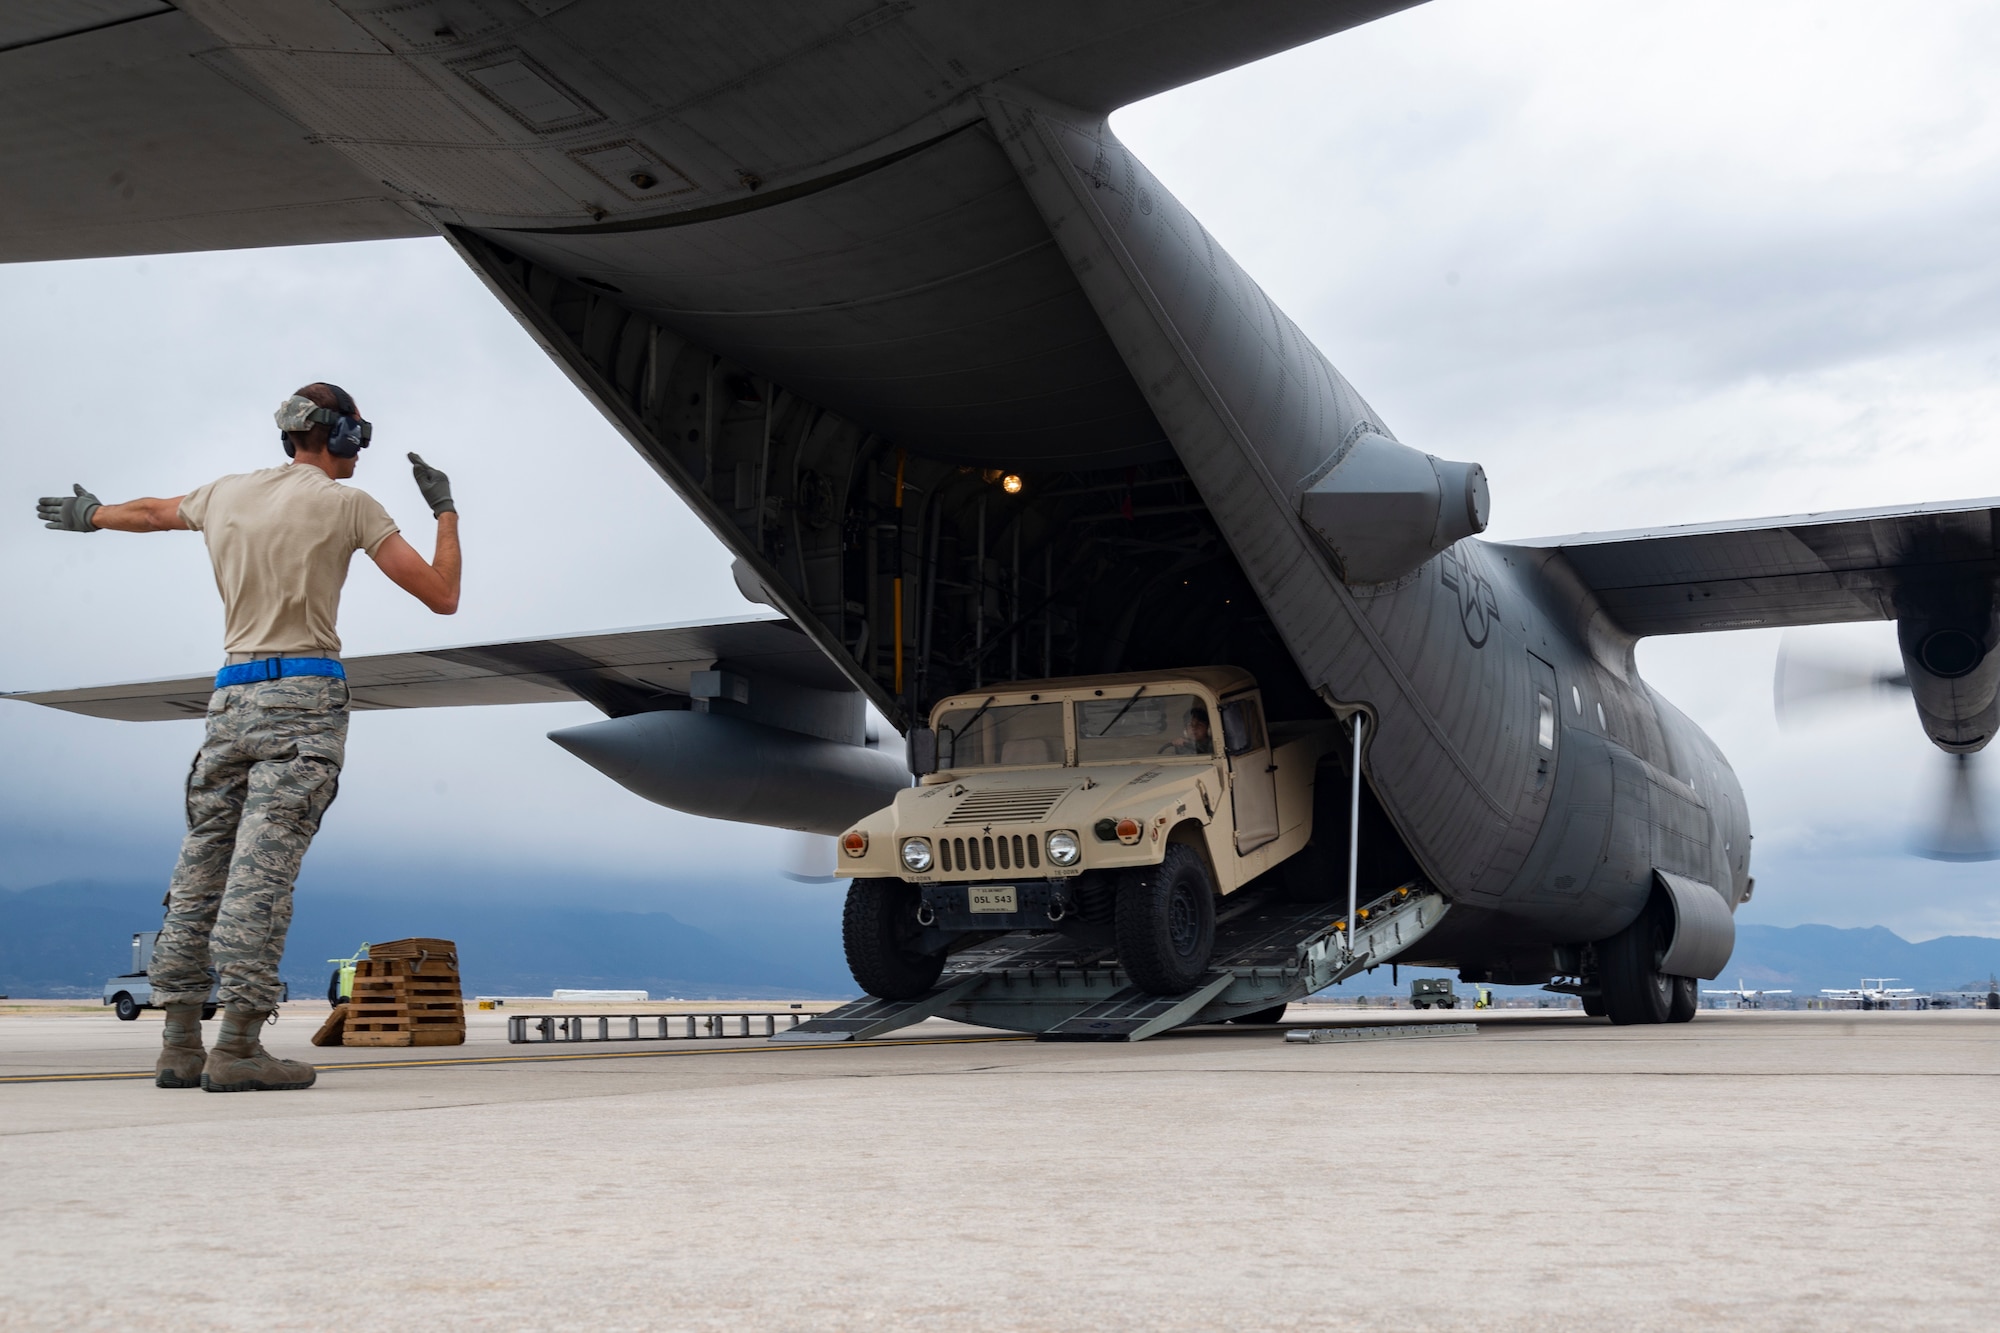 Tech. Sgt. Russell Hudson, a 39th Aerial Port Squadron air transportation technician, directs a vehicle as it is backed into a C-130 Hercules aircraft during an engine-running onload at Peterson Air Force Base, Colorado, April 17, 2019.